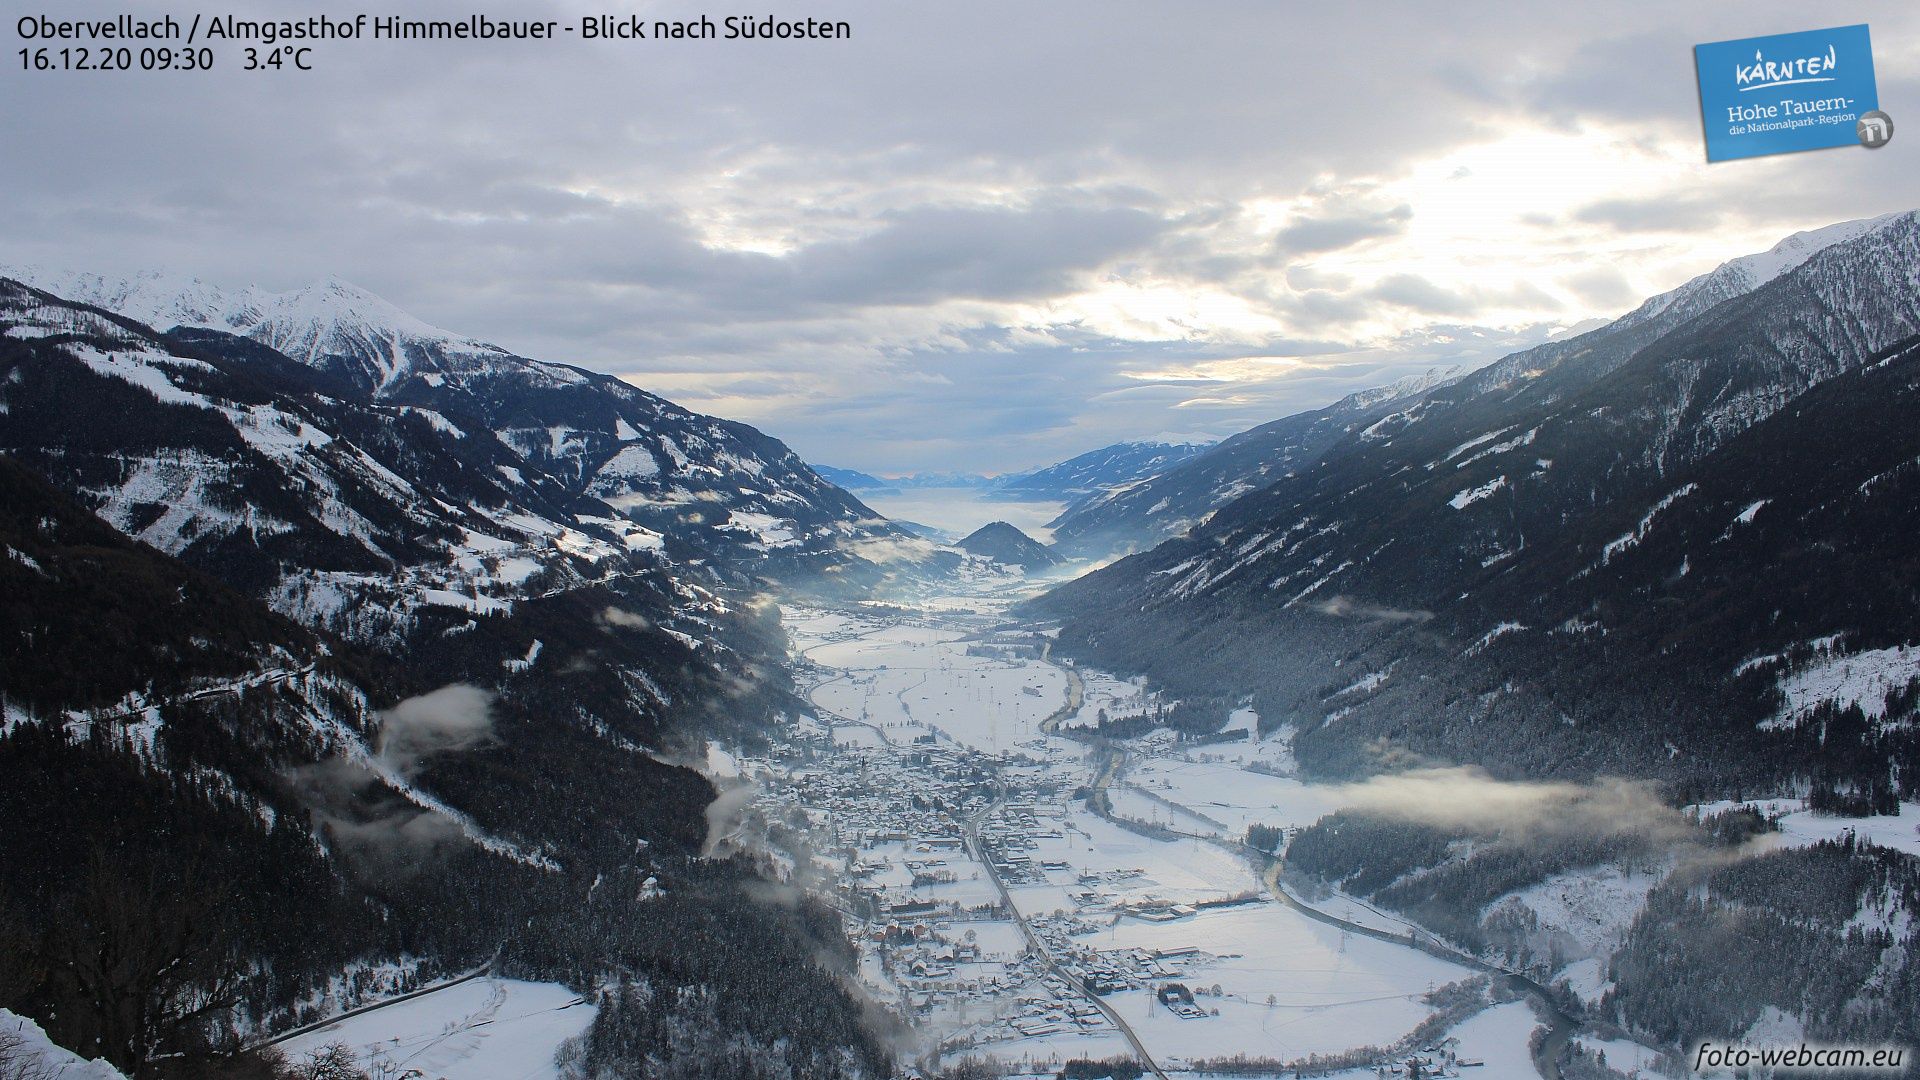 The inversion is clearly visible in Obervellach (Carinthia). Despite the warm southwestern high current, it's freezing in the valley all day long and the trees are still white